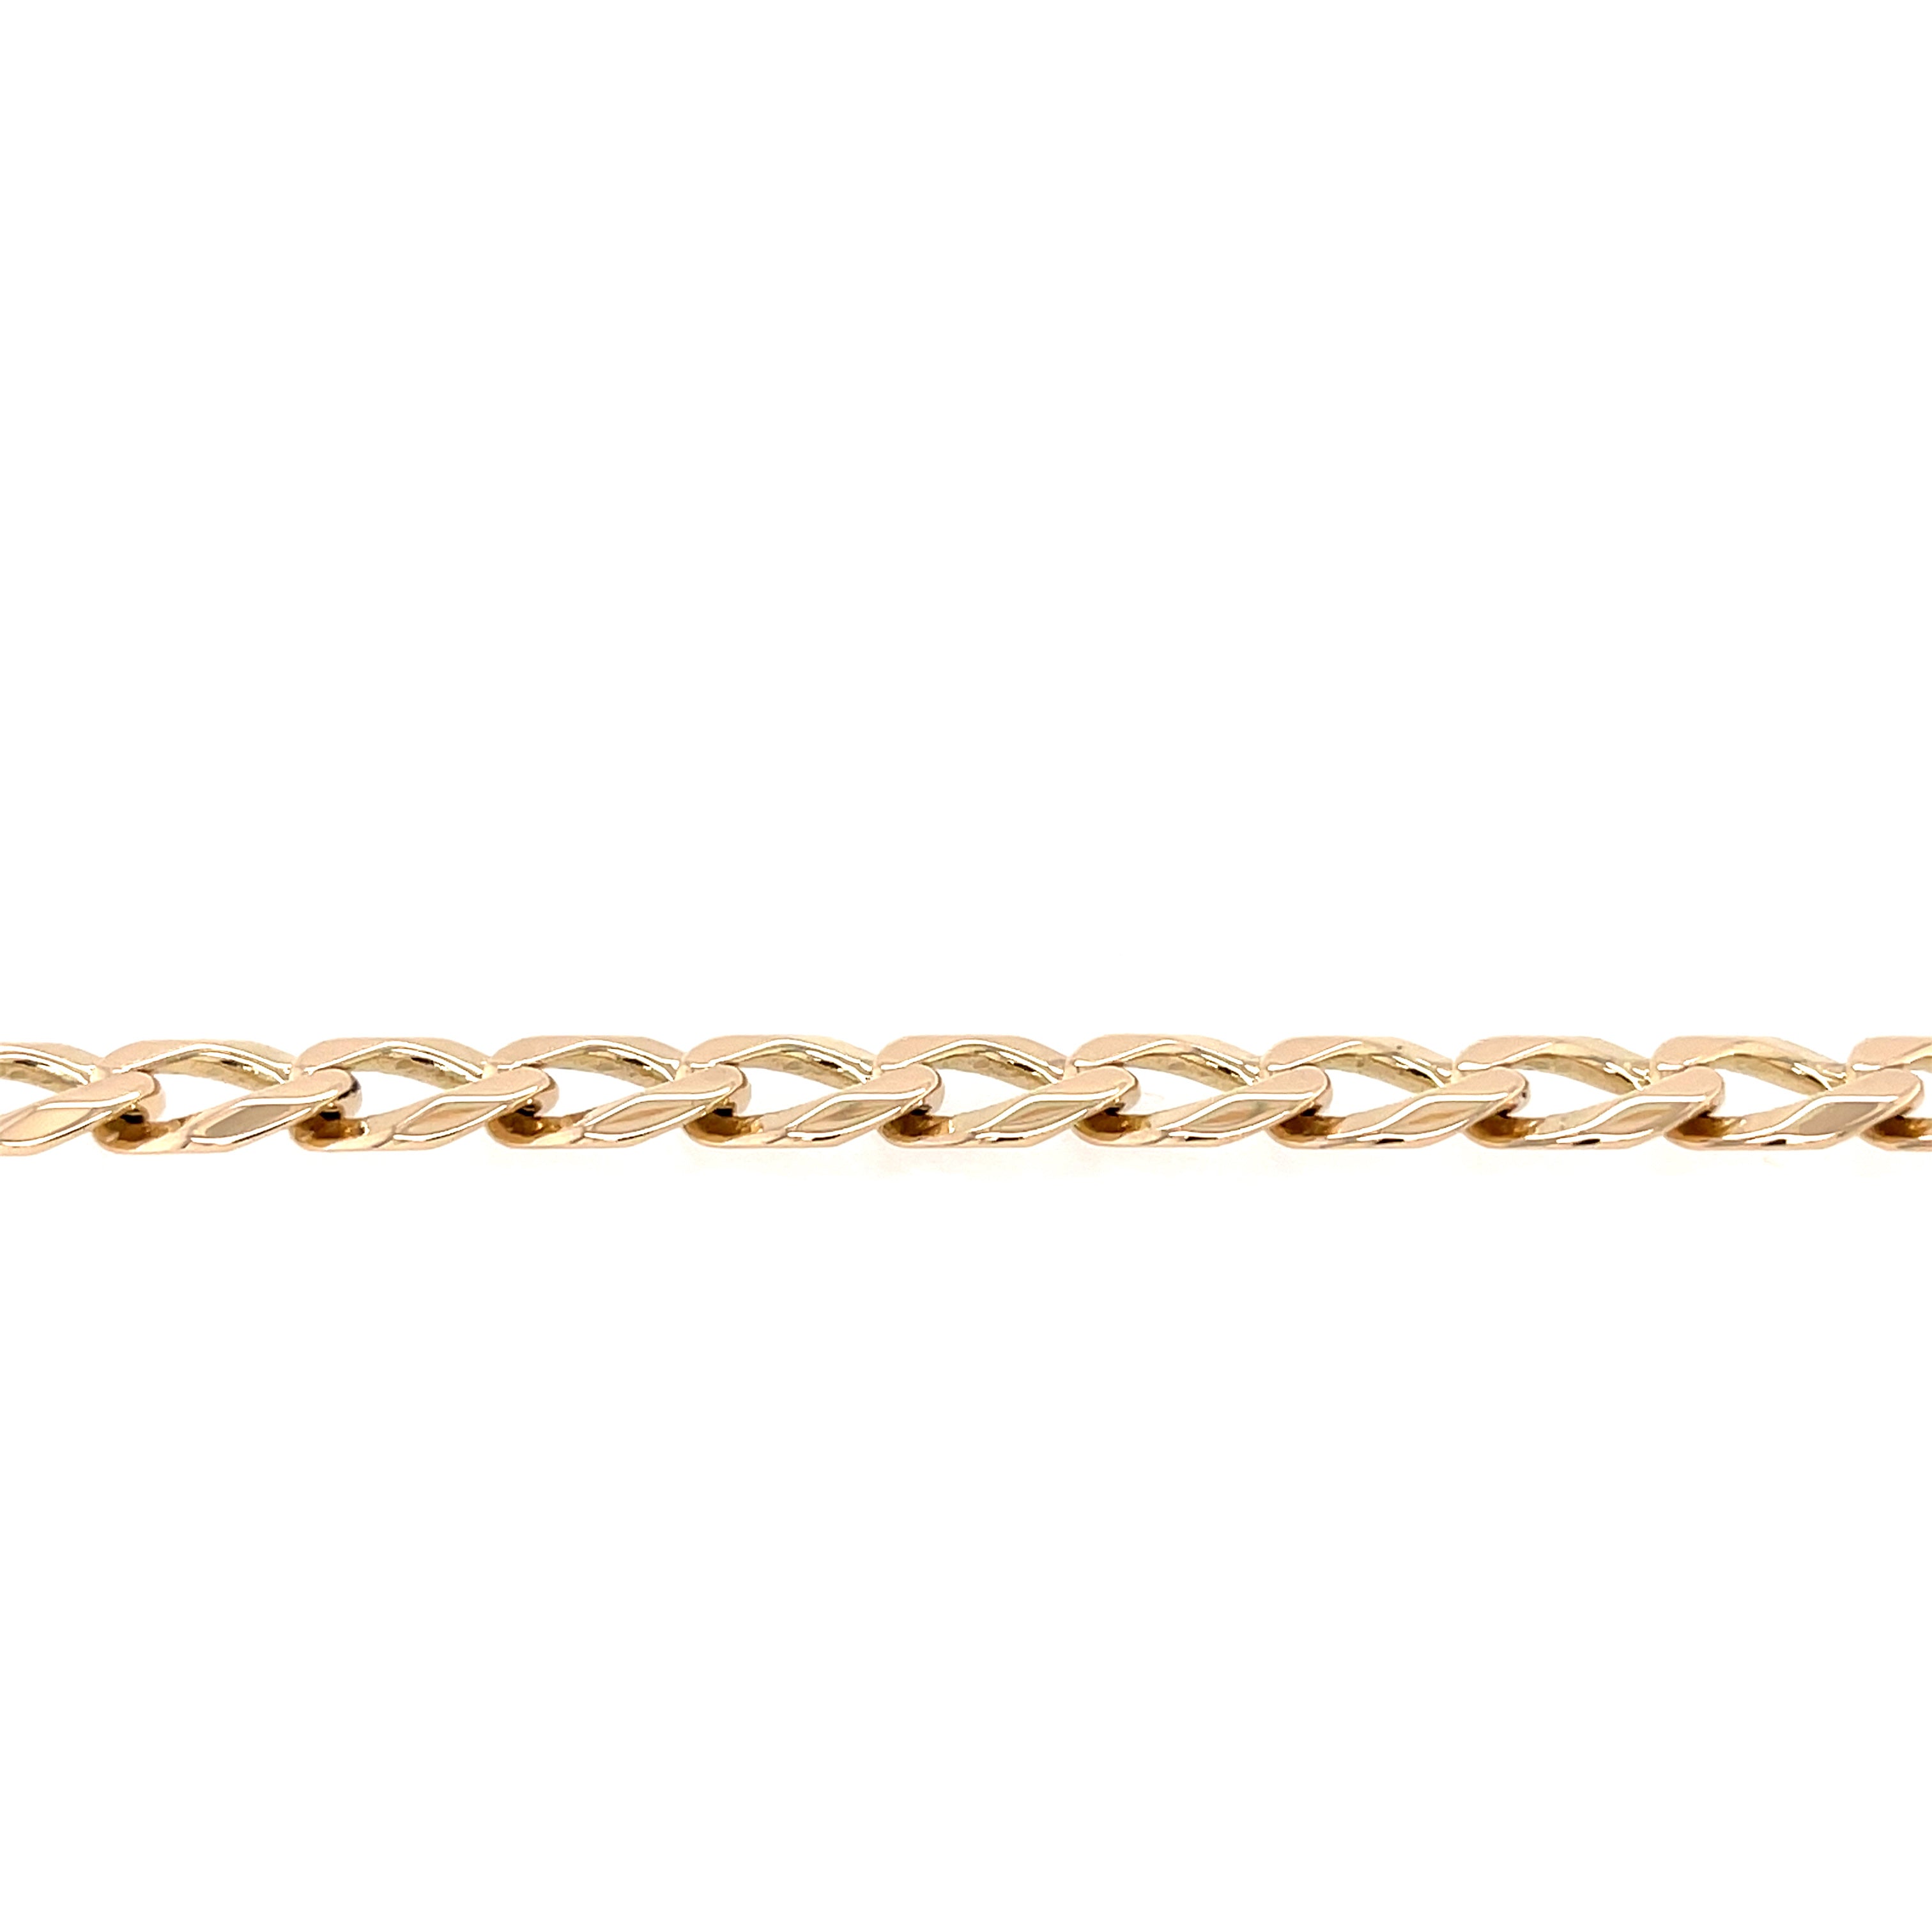 9ct Yellow Gold 9" Curb Link Bracelet - 13.40g